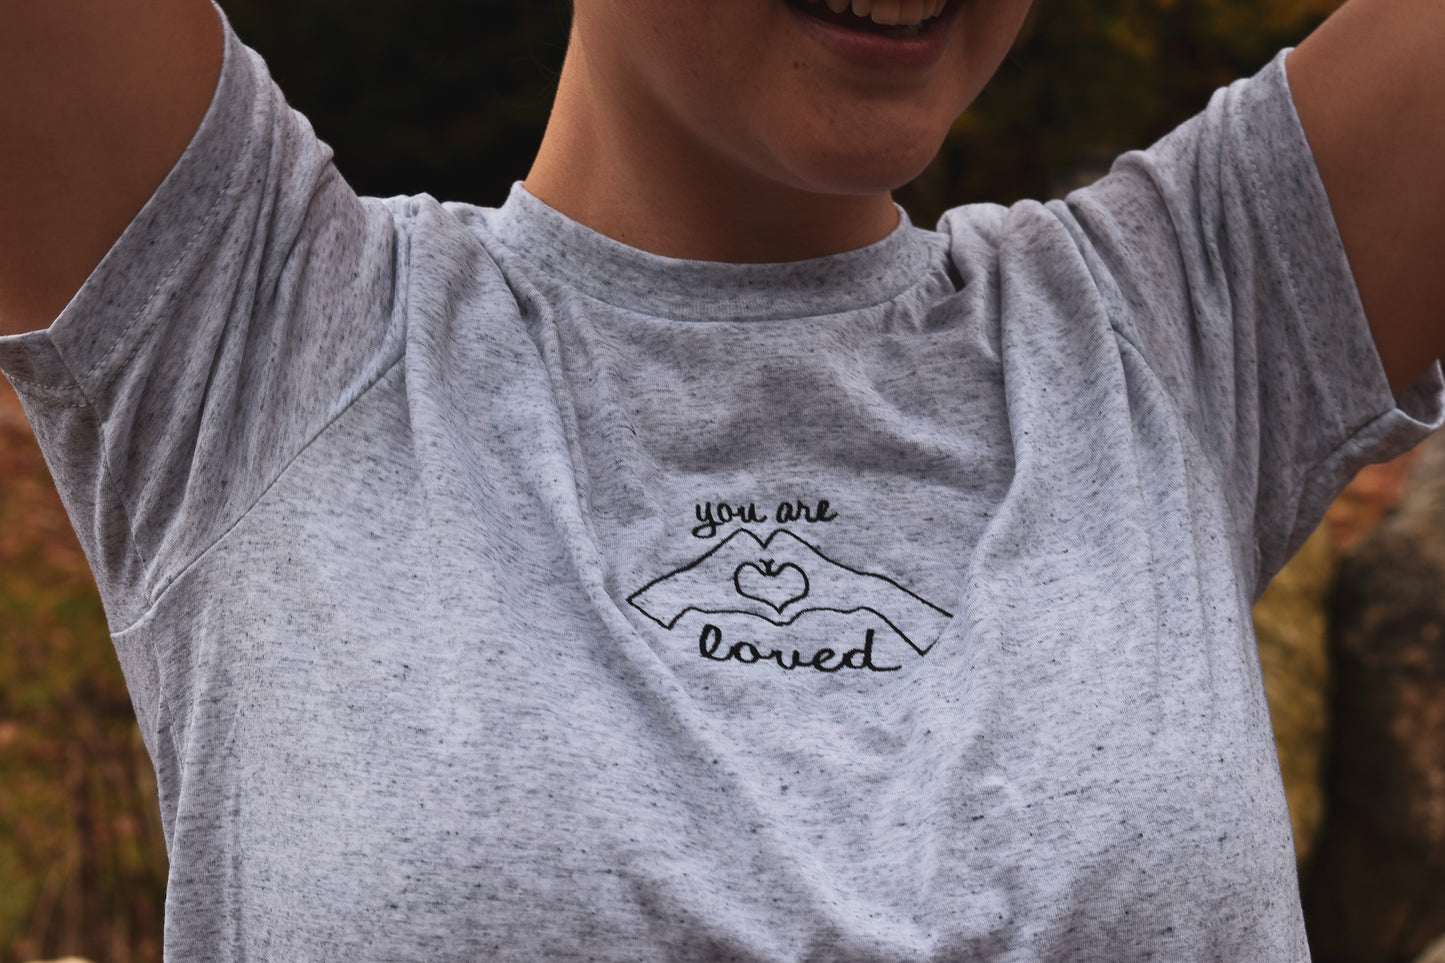 You are loved - T-Shirt - unisex